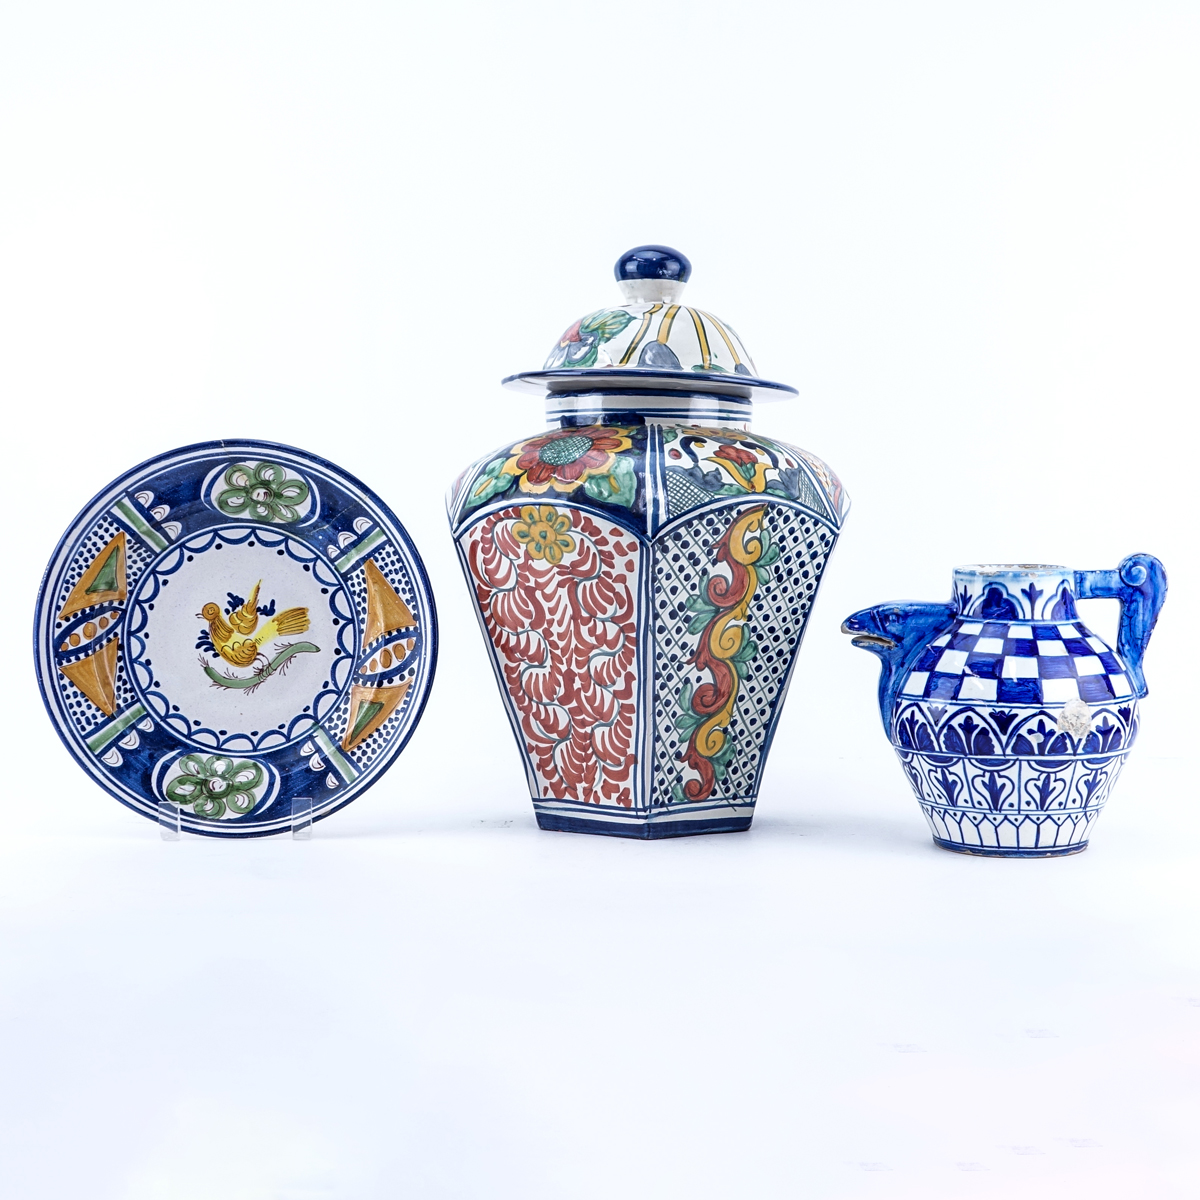 Grouping of Three (3): Large Mexican Faience Pottery Covered Jar, Faience Pottery Cabinet Plate, and Faience Pottery Pitcher. Covered jar is signed others are unsigned.